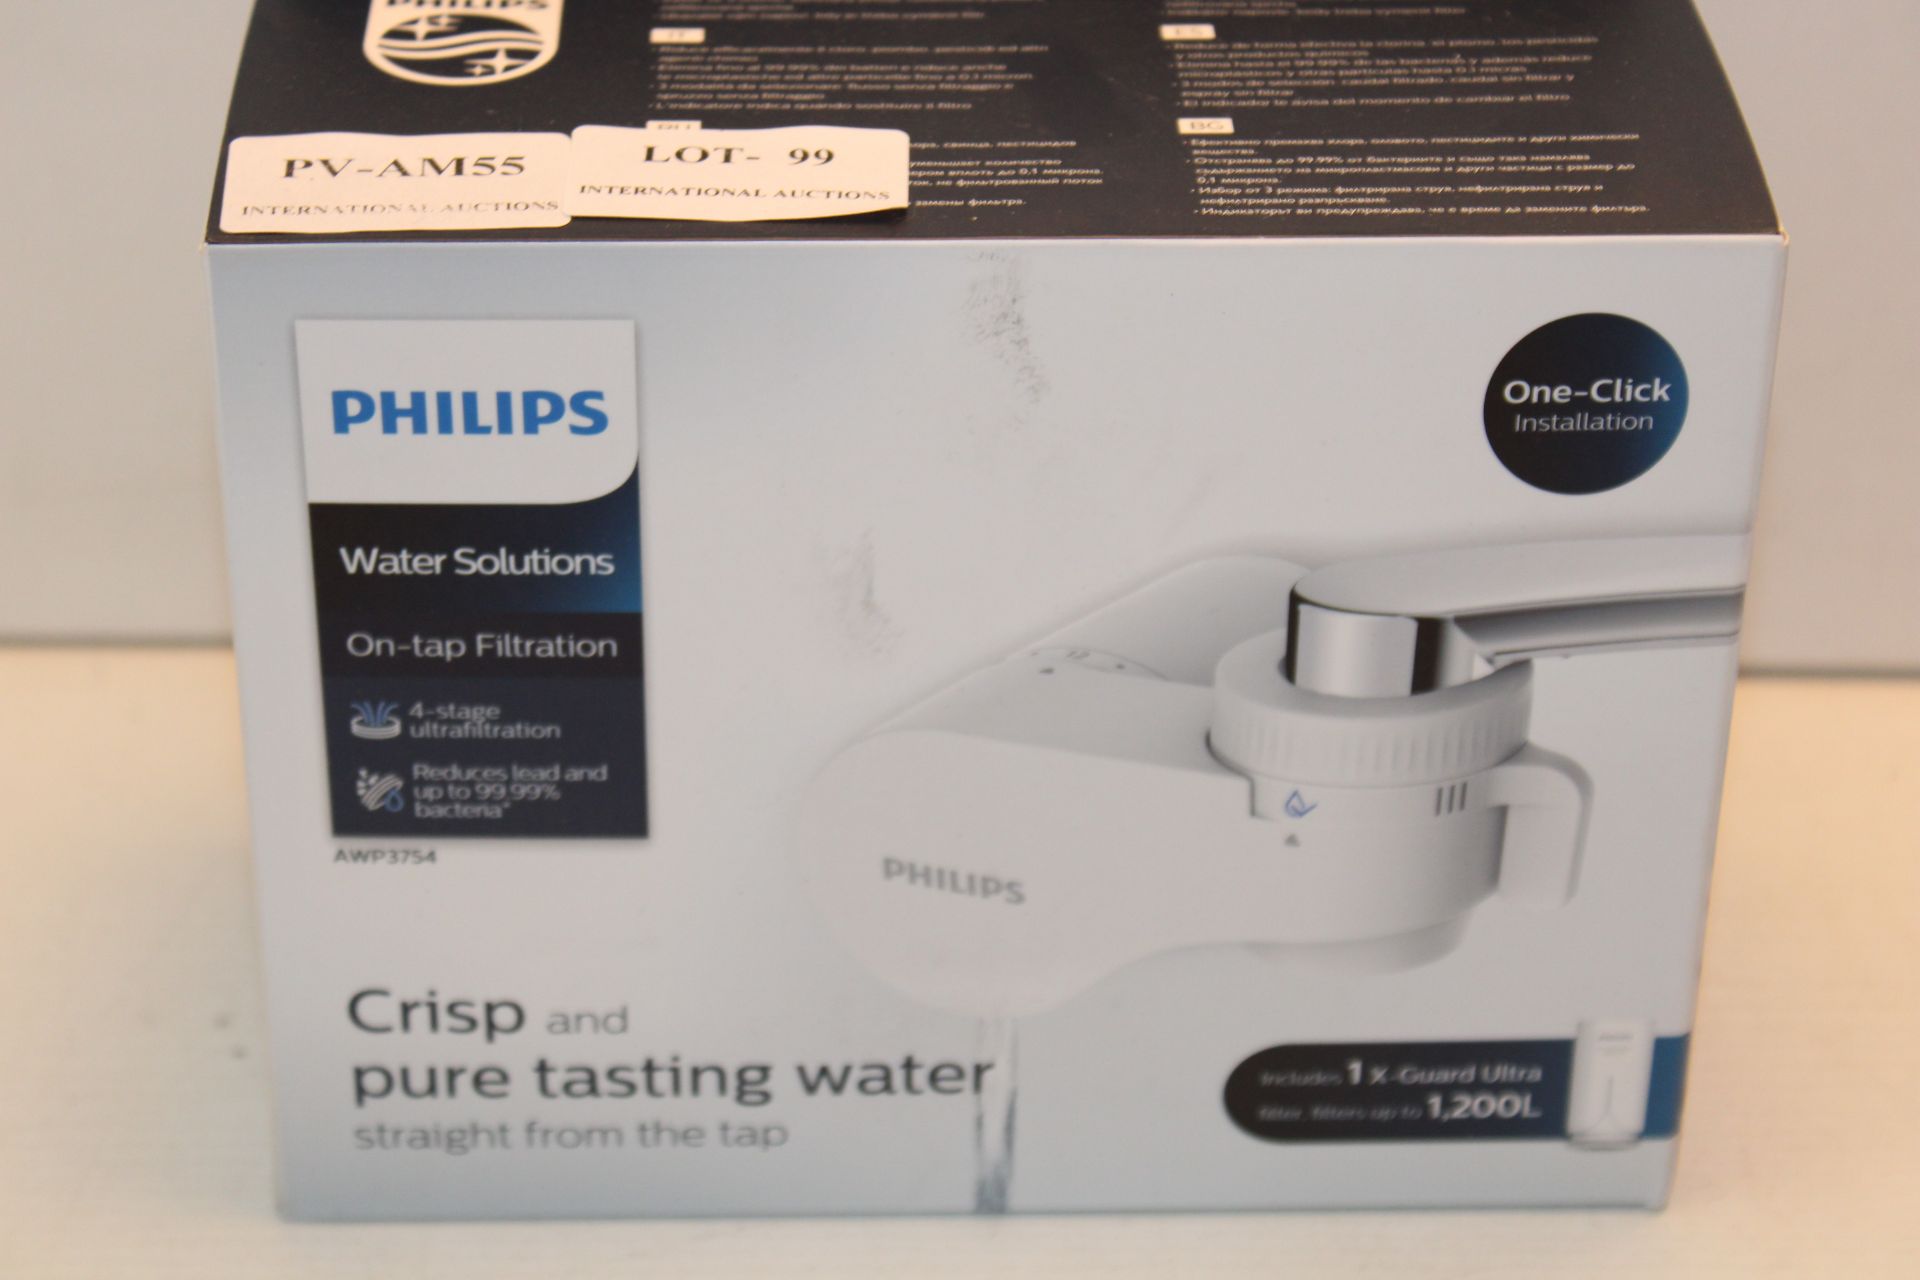 BOXED PHILIPS WATER SOLUTIONS ON-TAP FILTRATIONCondition ReportAppraisal Available on Request- All